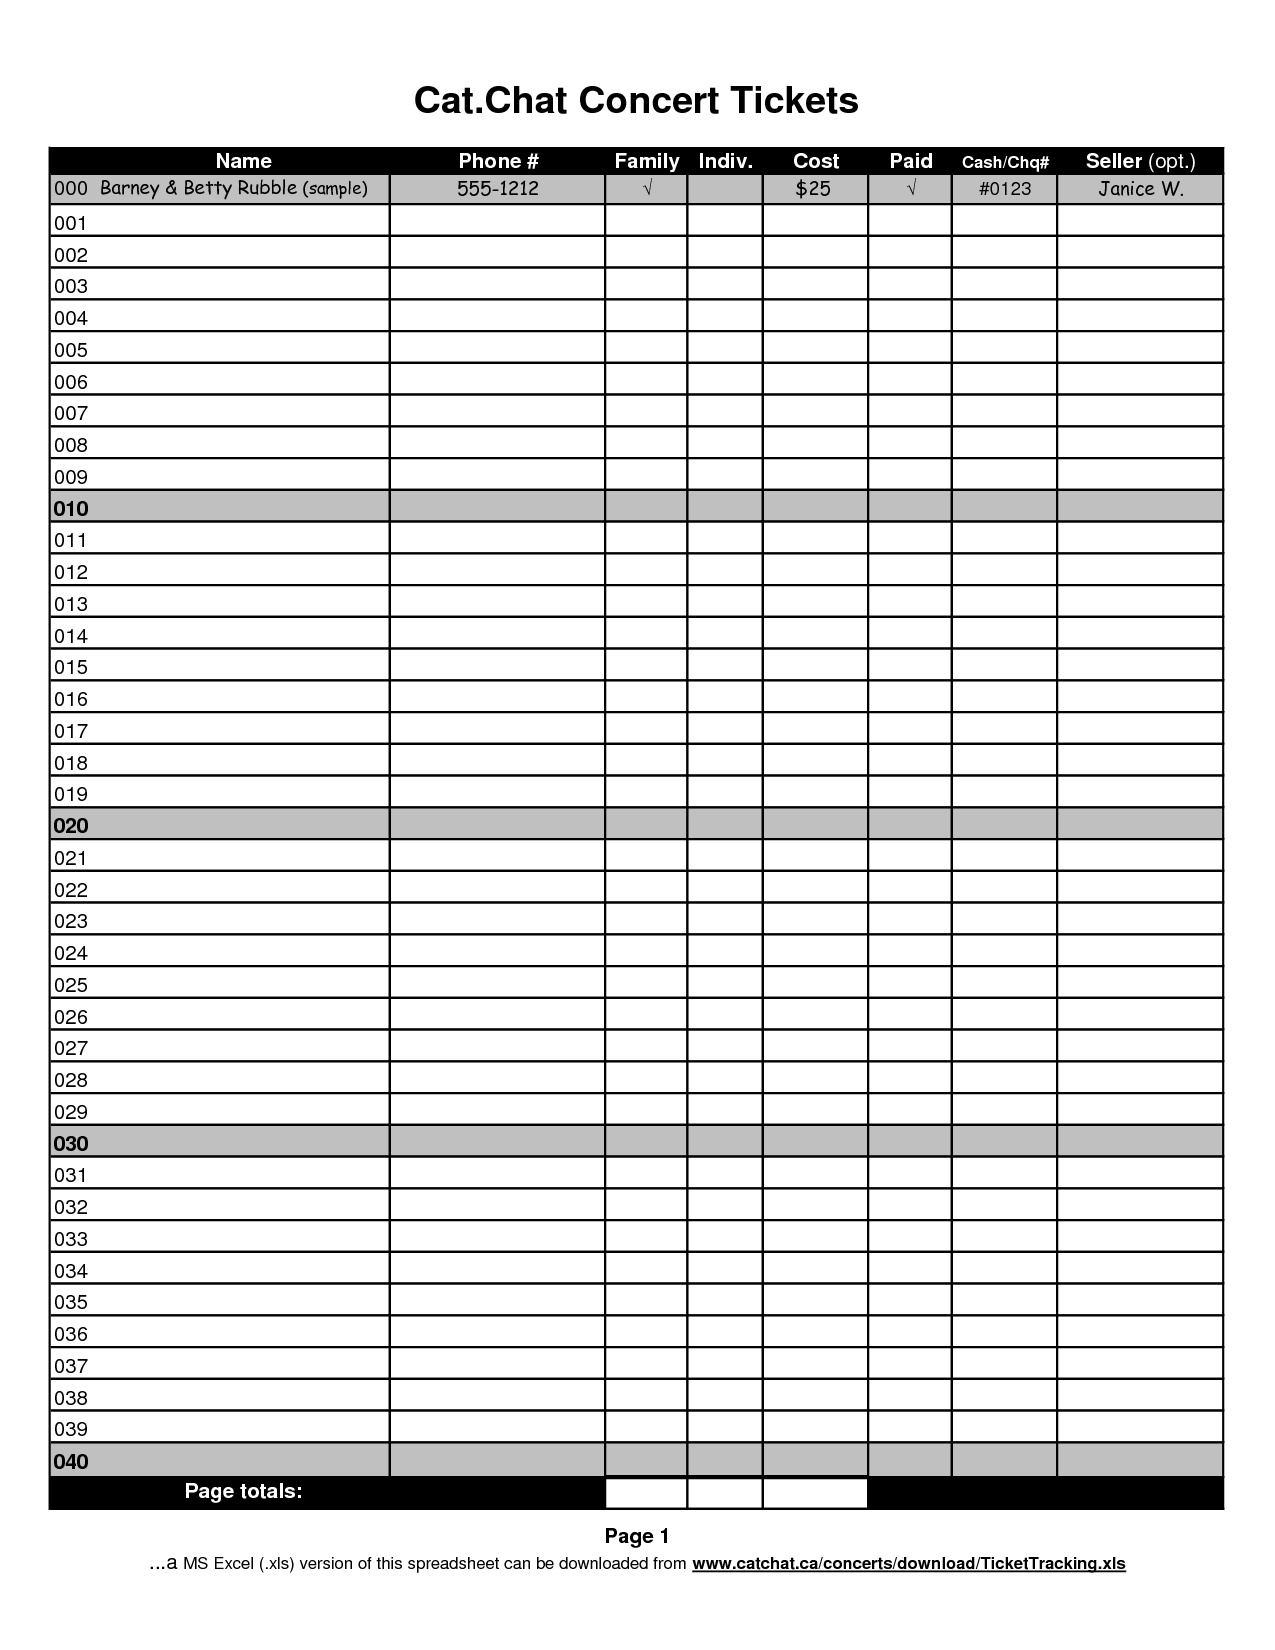 Ticket Sales Spreadsheet Template Archives - Southbay Robot Intended For Ticket Sales Tracking Spreadsheet